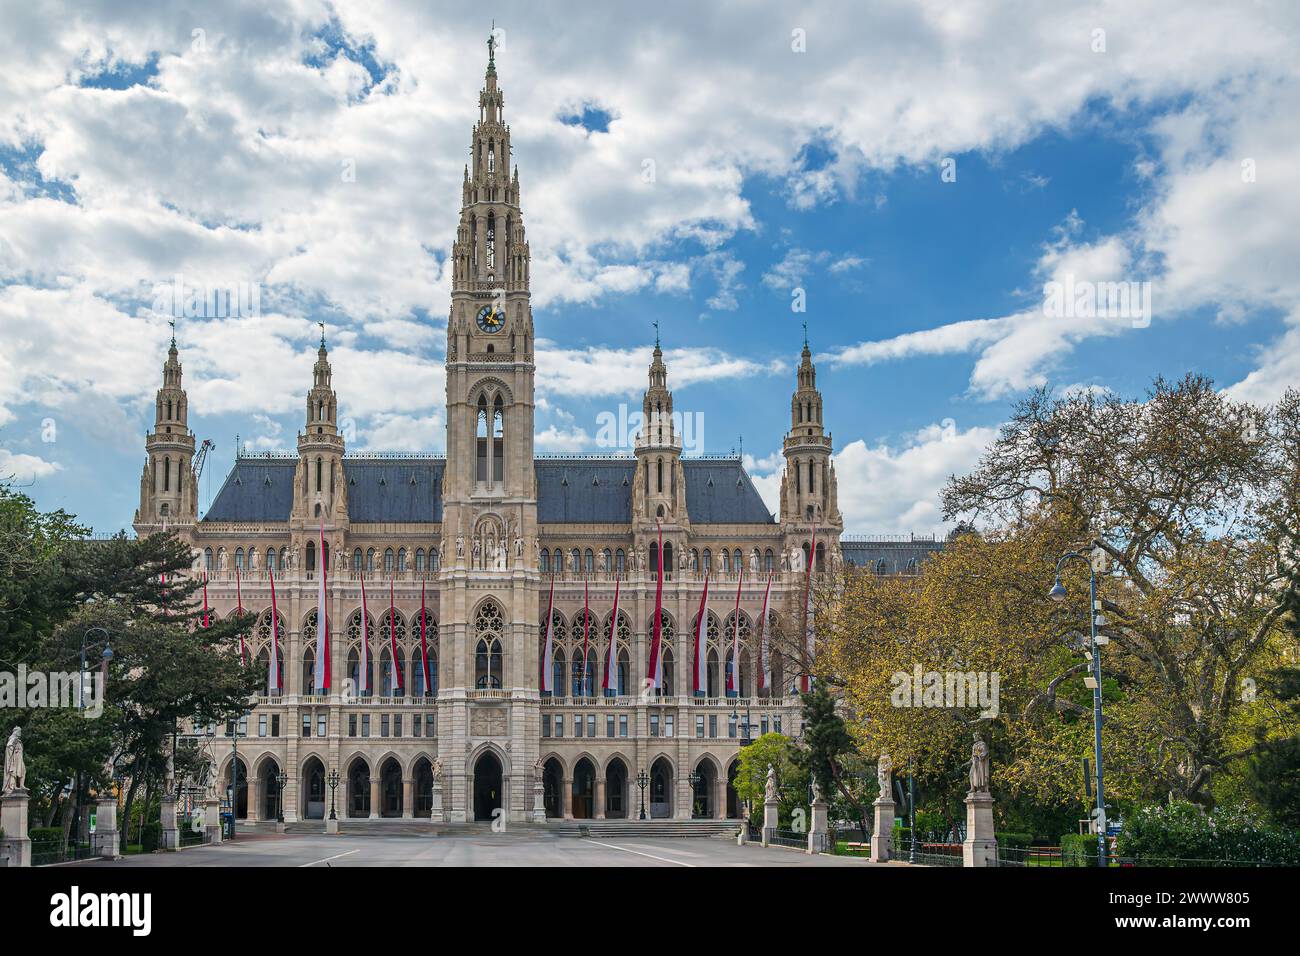 Vienna City Hall (German: Wiener Rathaus), the seat of local government of Vienna, Austria, located on the Rathausplatz in the Innere Stadt district. Stock Photo